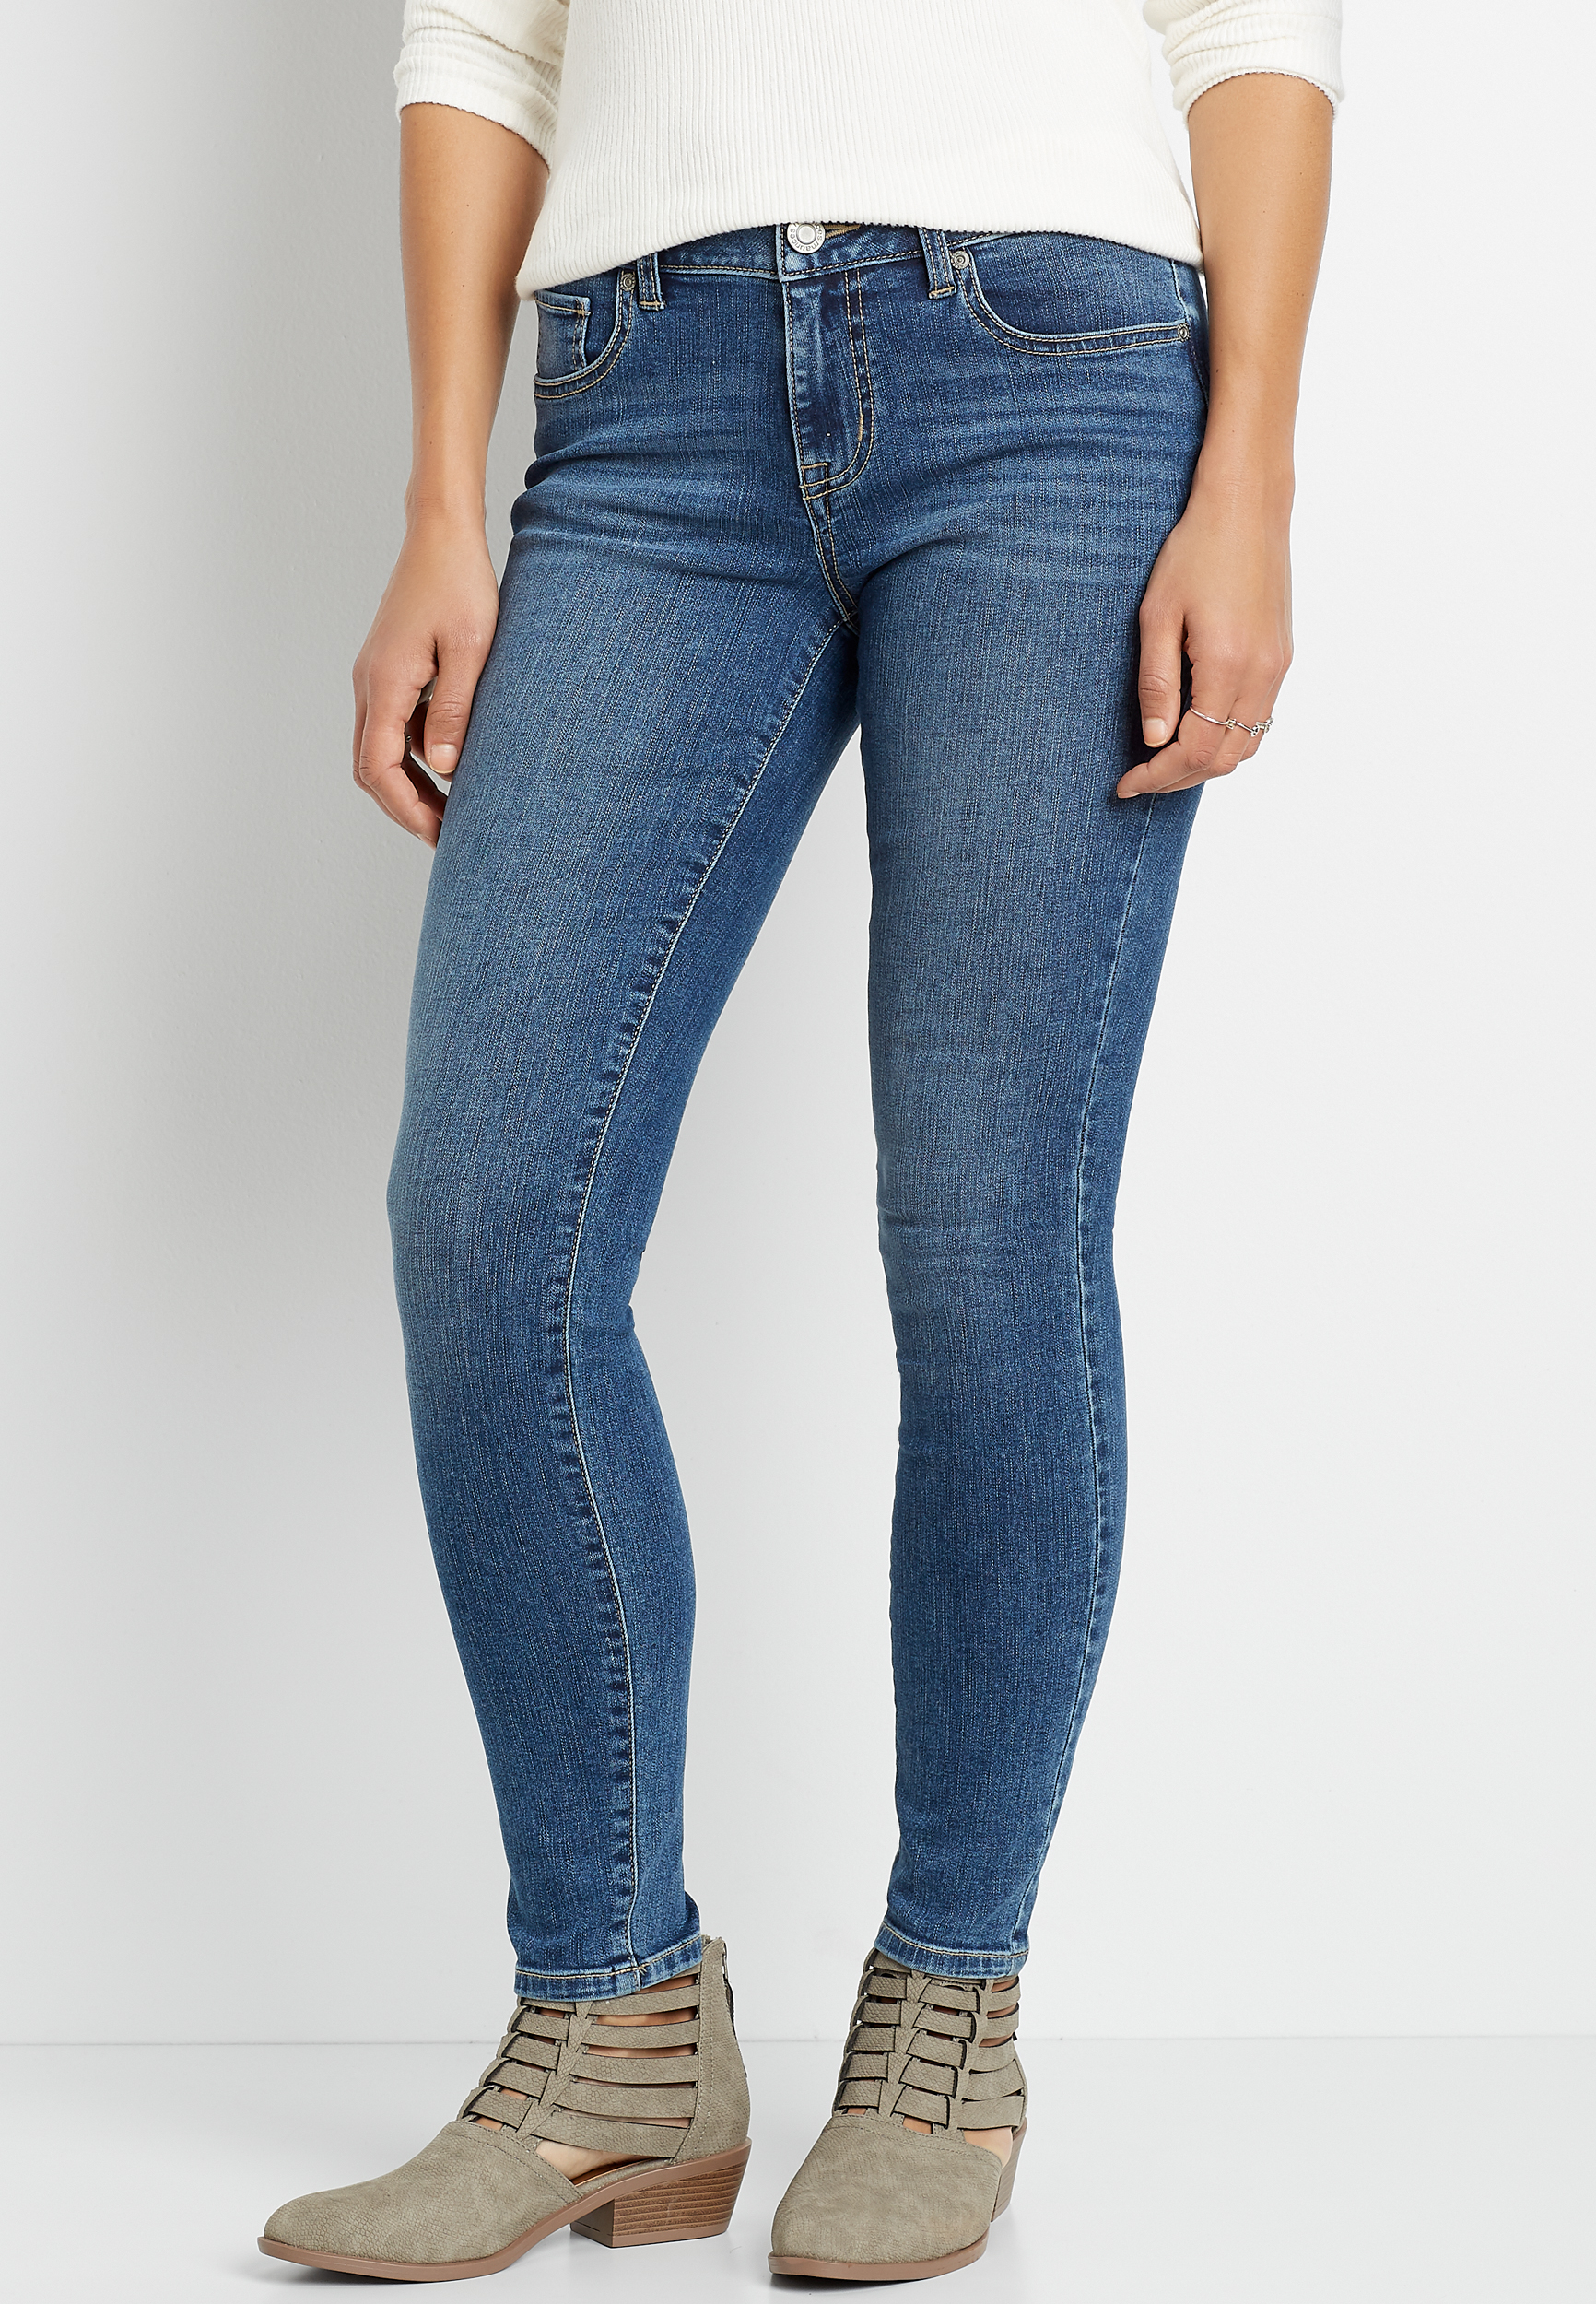 extra short jeans womens